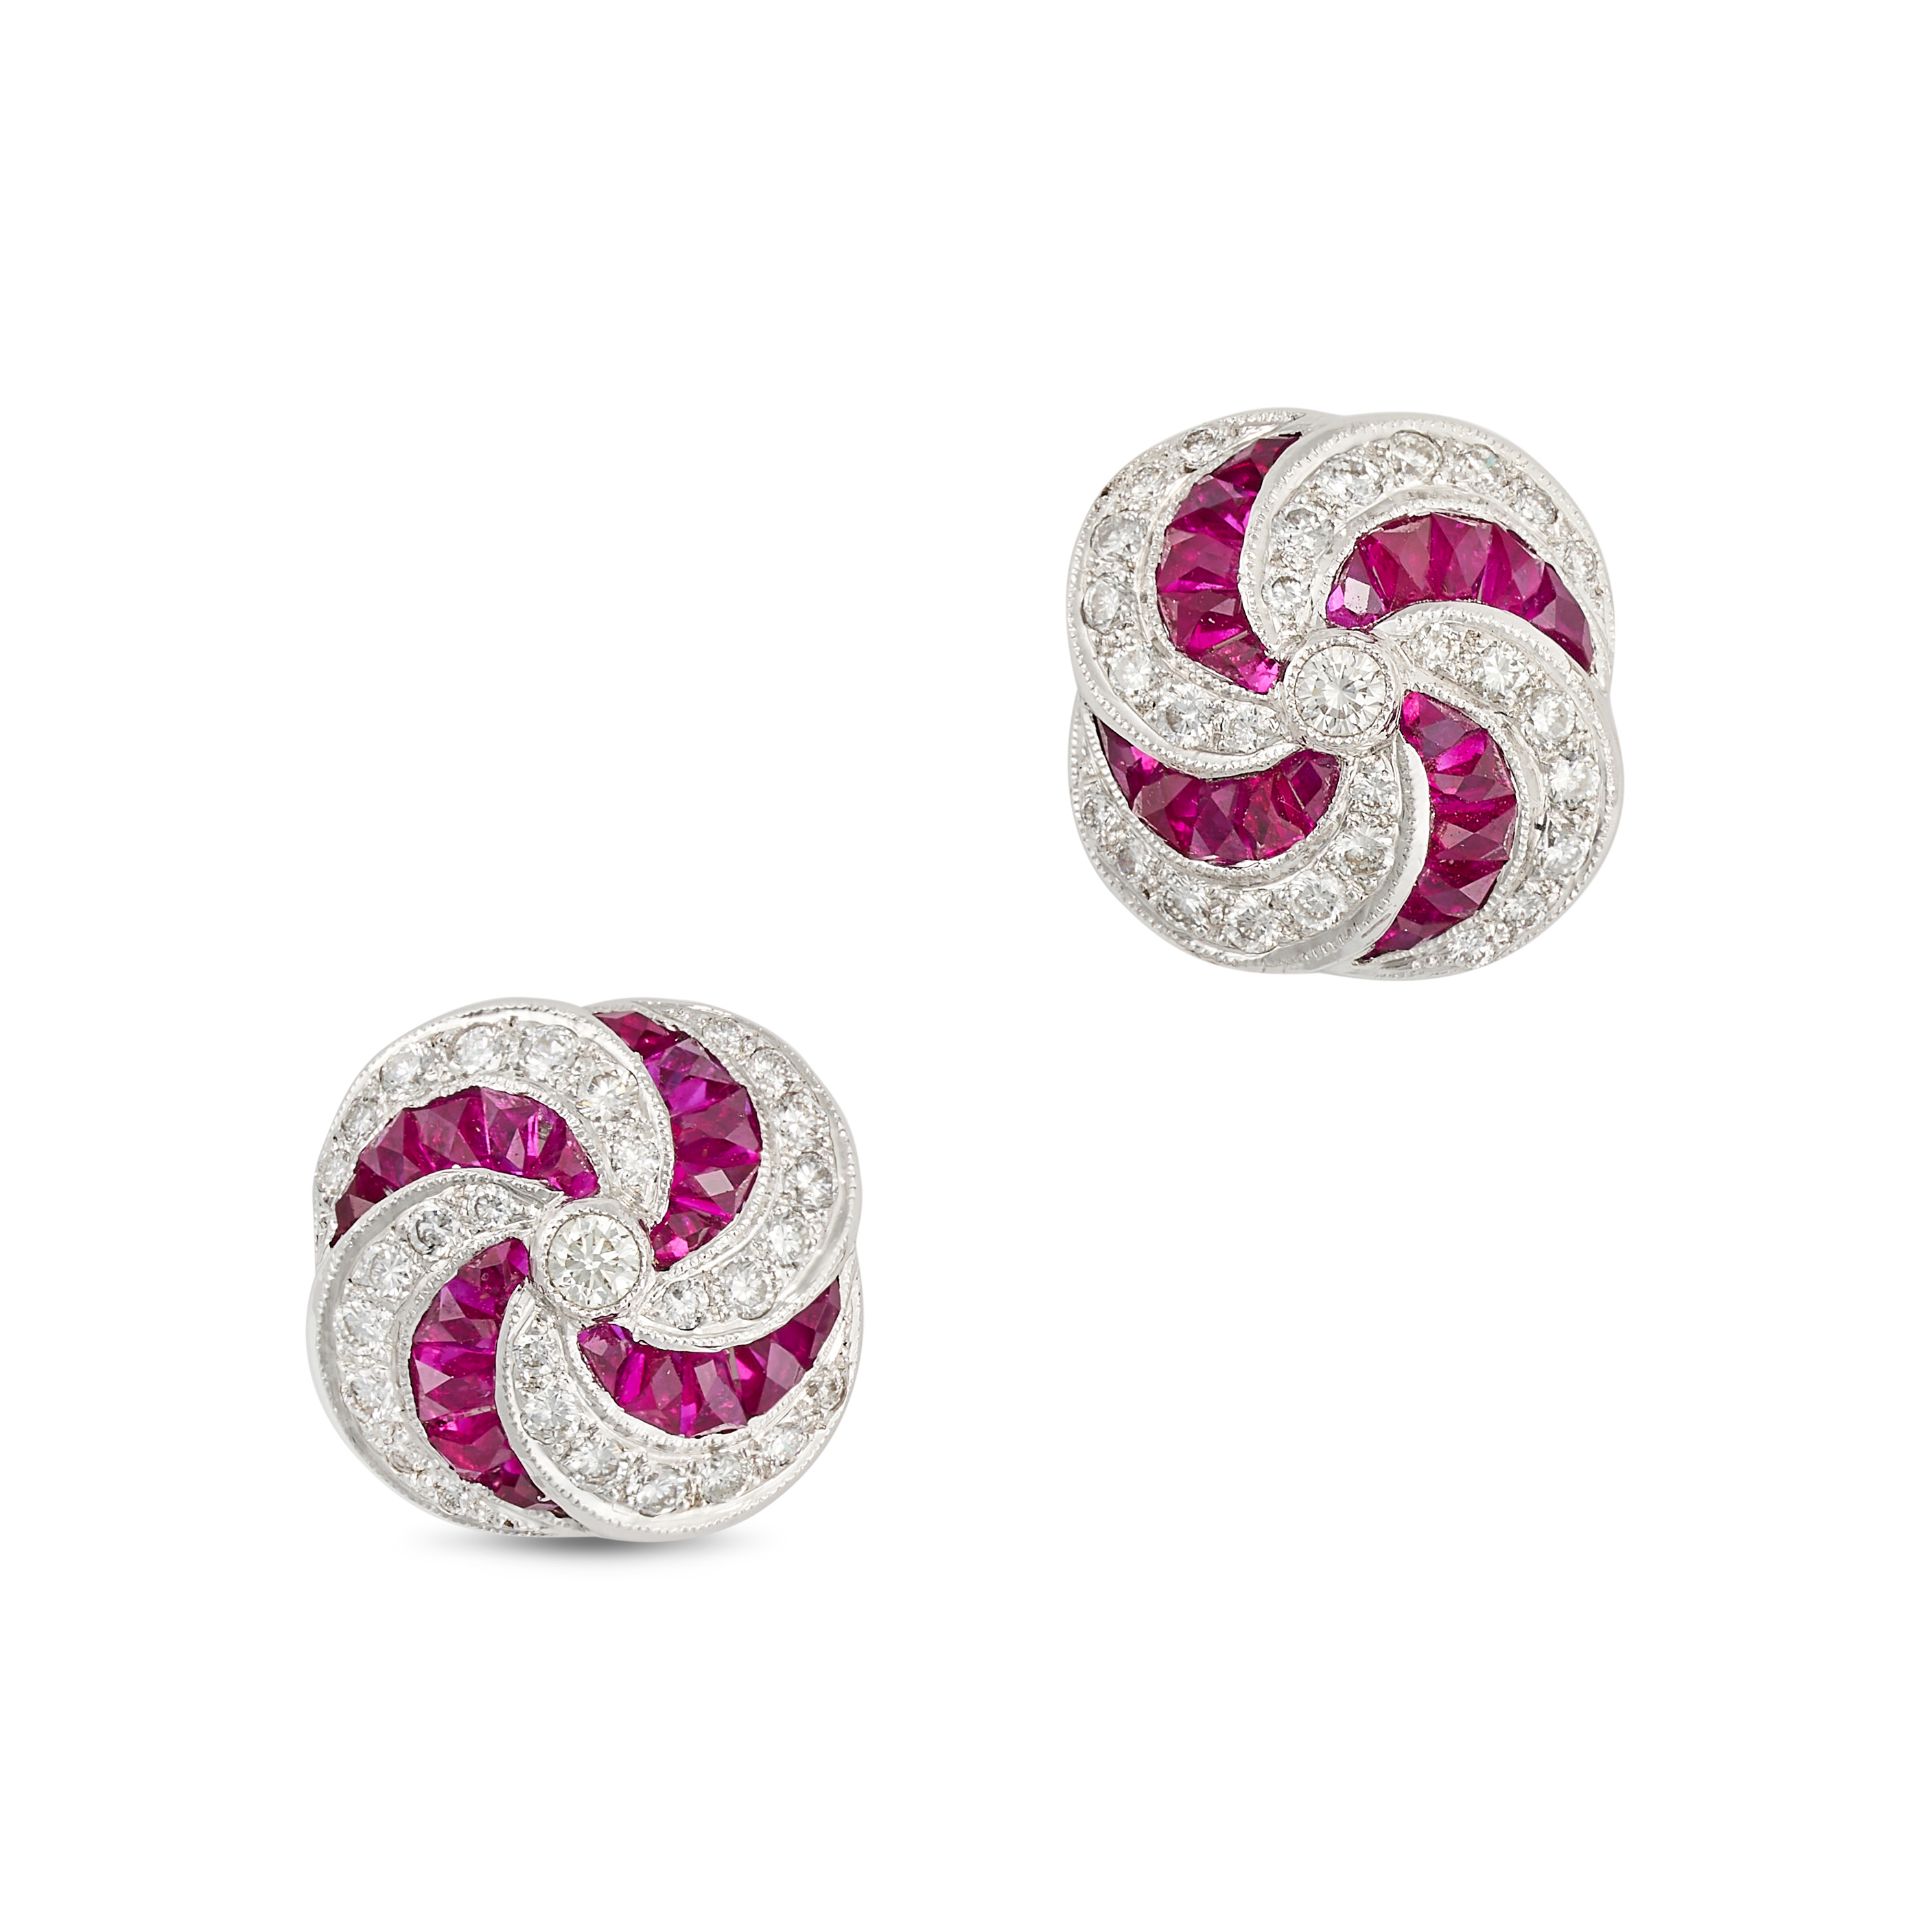 A PAIR OF RUBY AND DIAMOND EARRINGS in 18ct white gold, each stud in a scrolling design, set with...